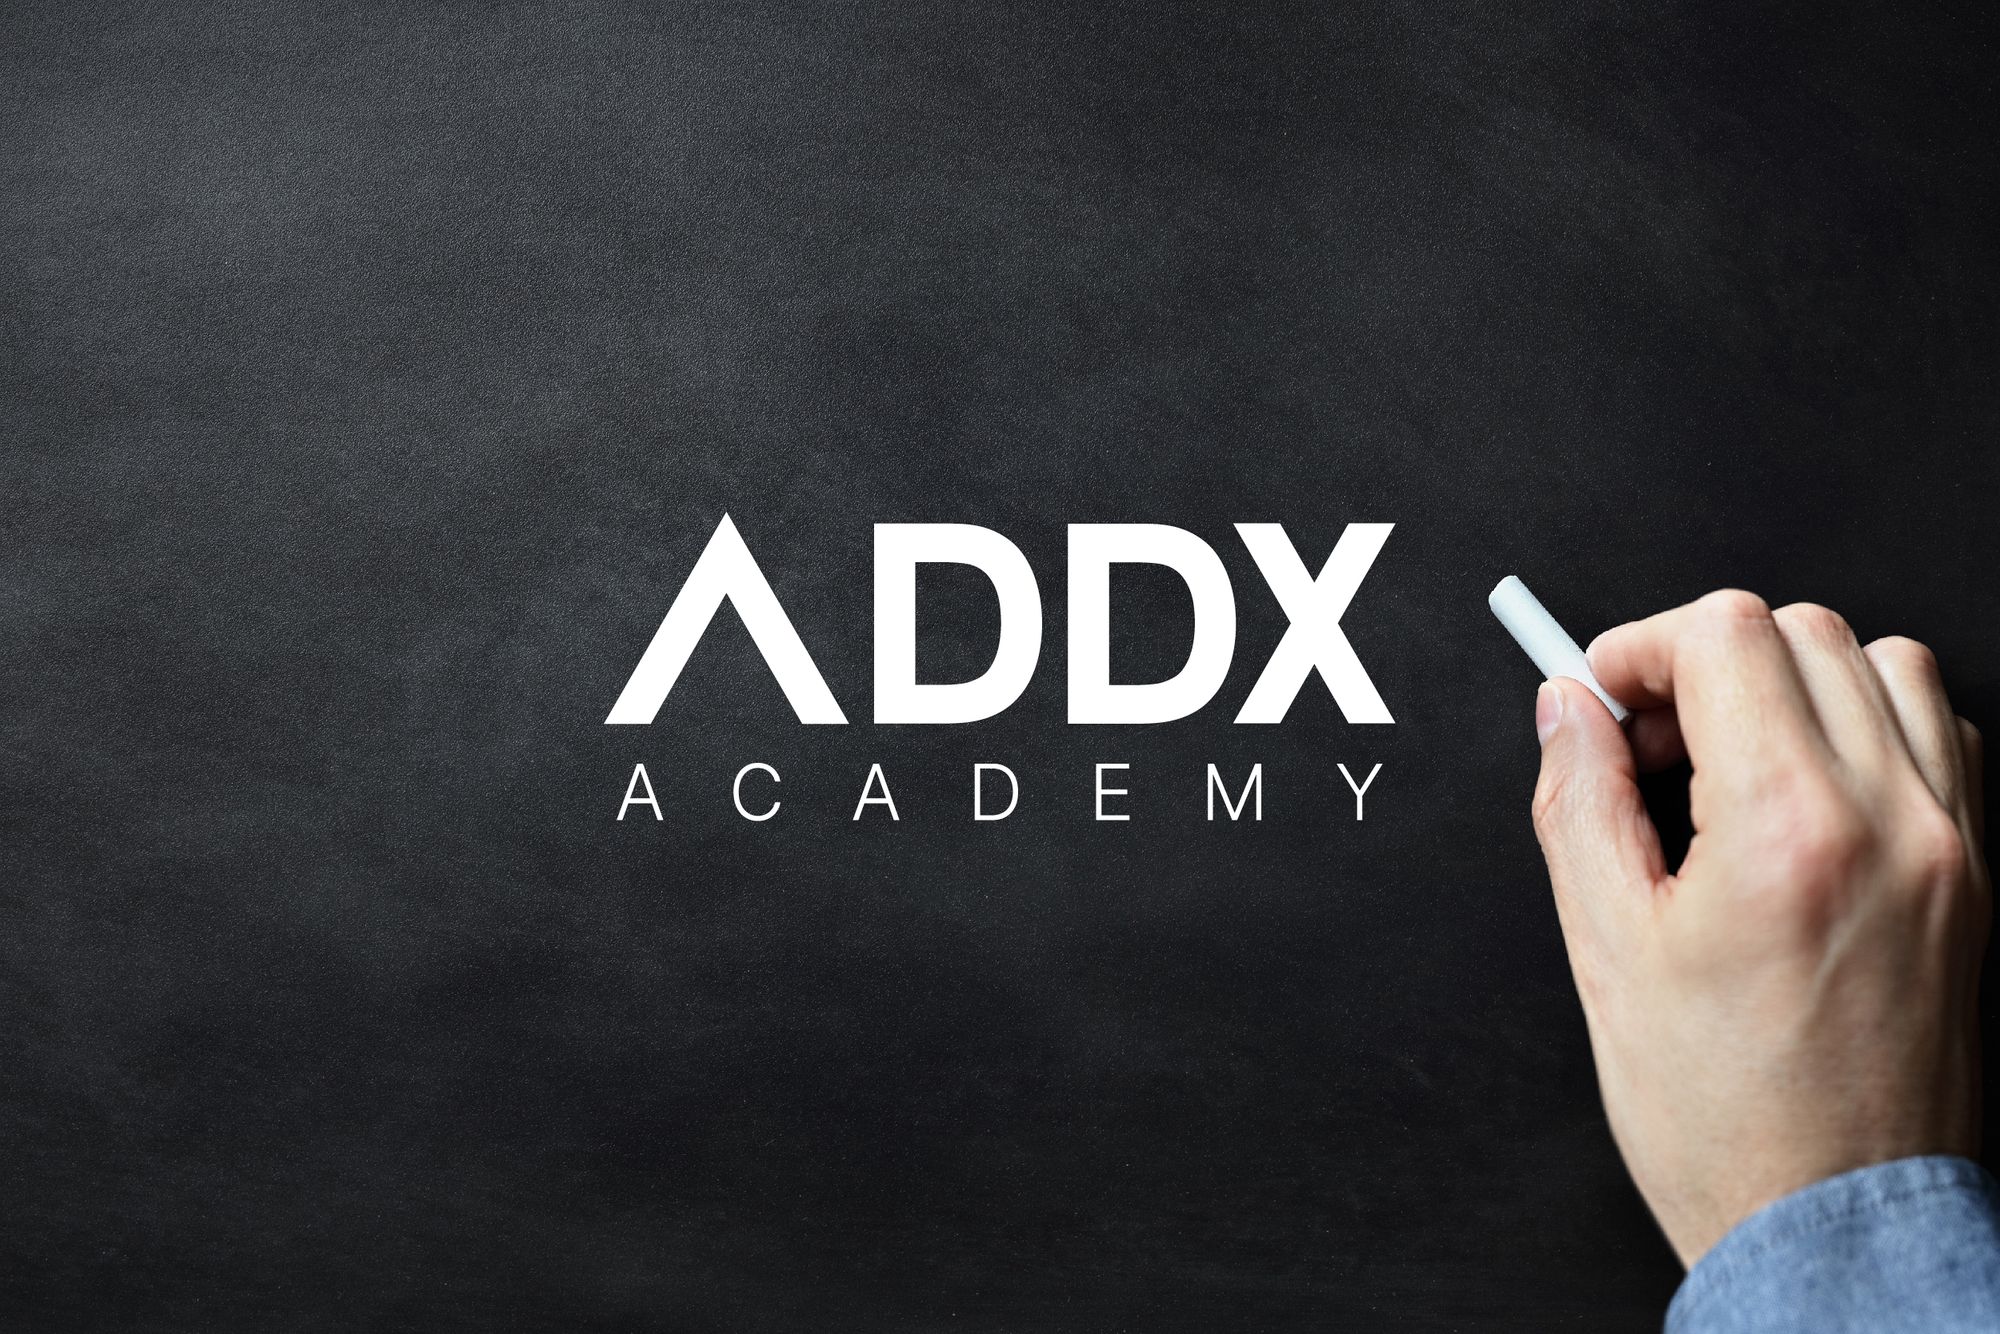 ADDX Academy: What Are Venture Capital Funds?